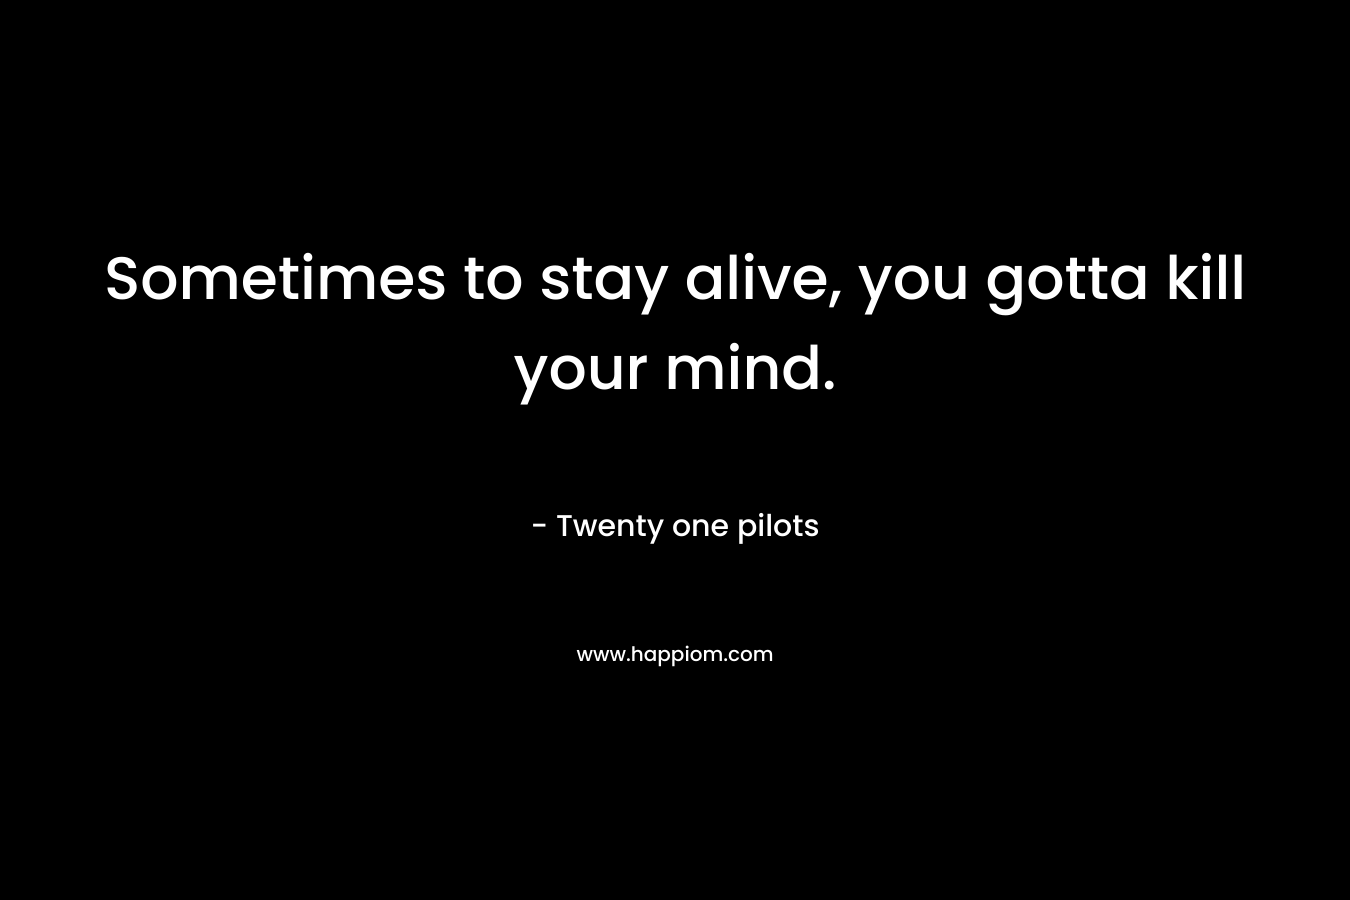 Sometimes to stay alive, you gotta kill your mind.